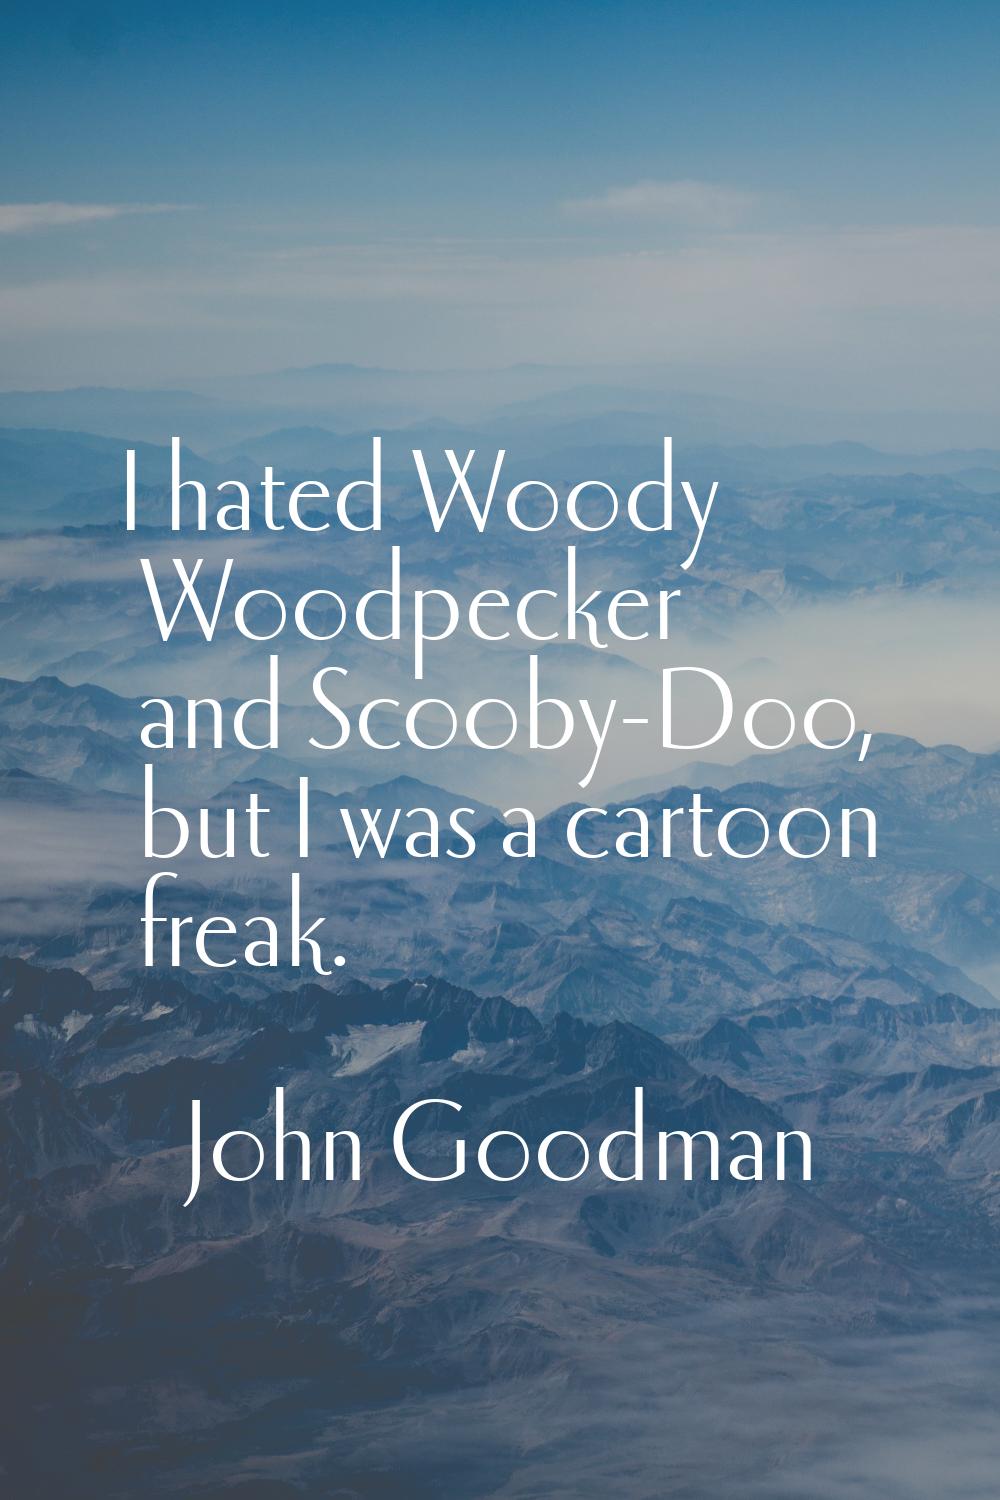 I hated Woody Woodpecker and Scooby-Doo, but I was a cartoon freak.